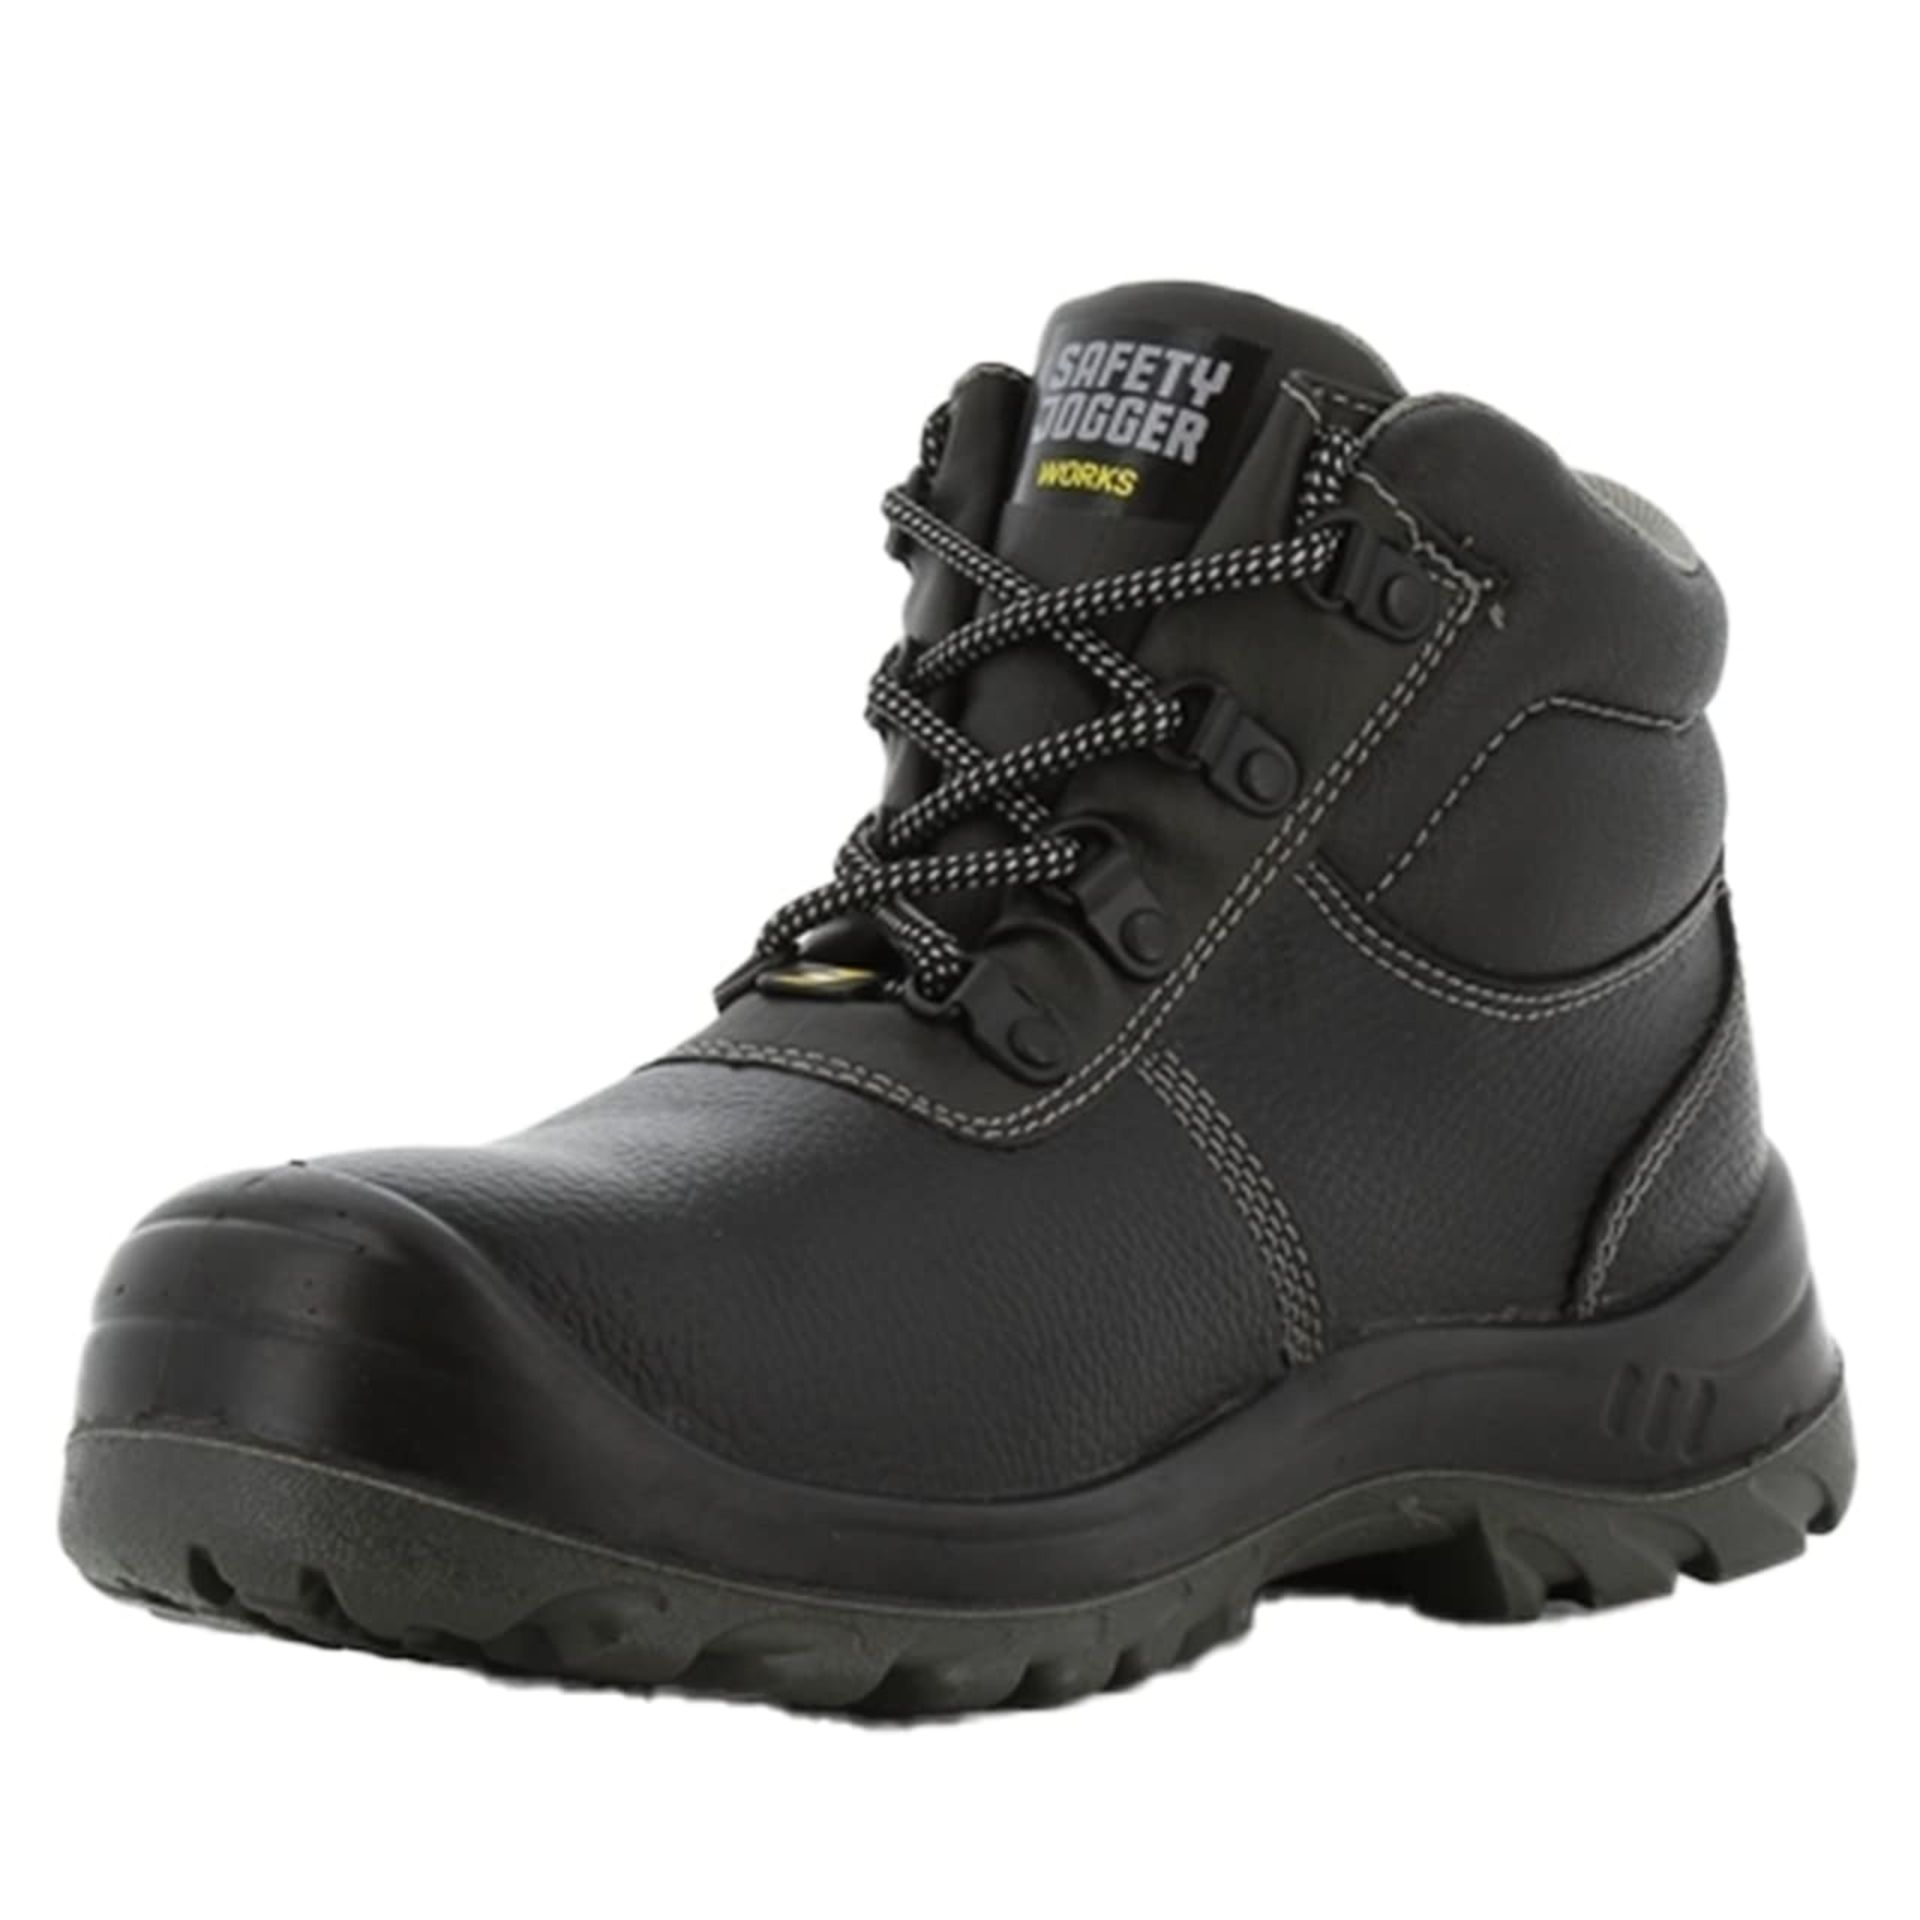 RRP - £25.55 Safety Jogger Safety Boot - Steel Toe Cap S3/S1P Work Shoe for Men or Women, Anti Slip - Image 2 of 2